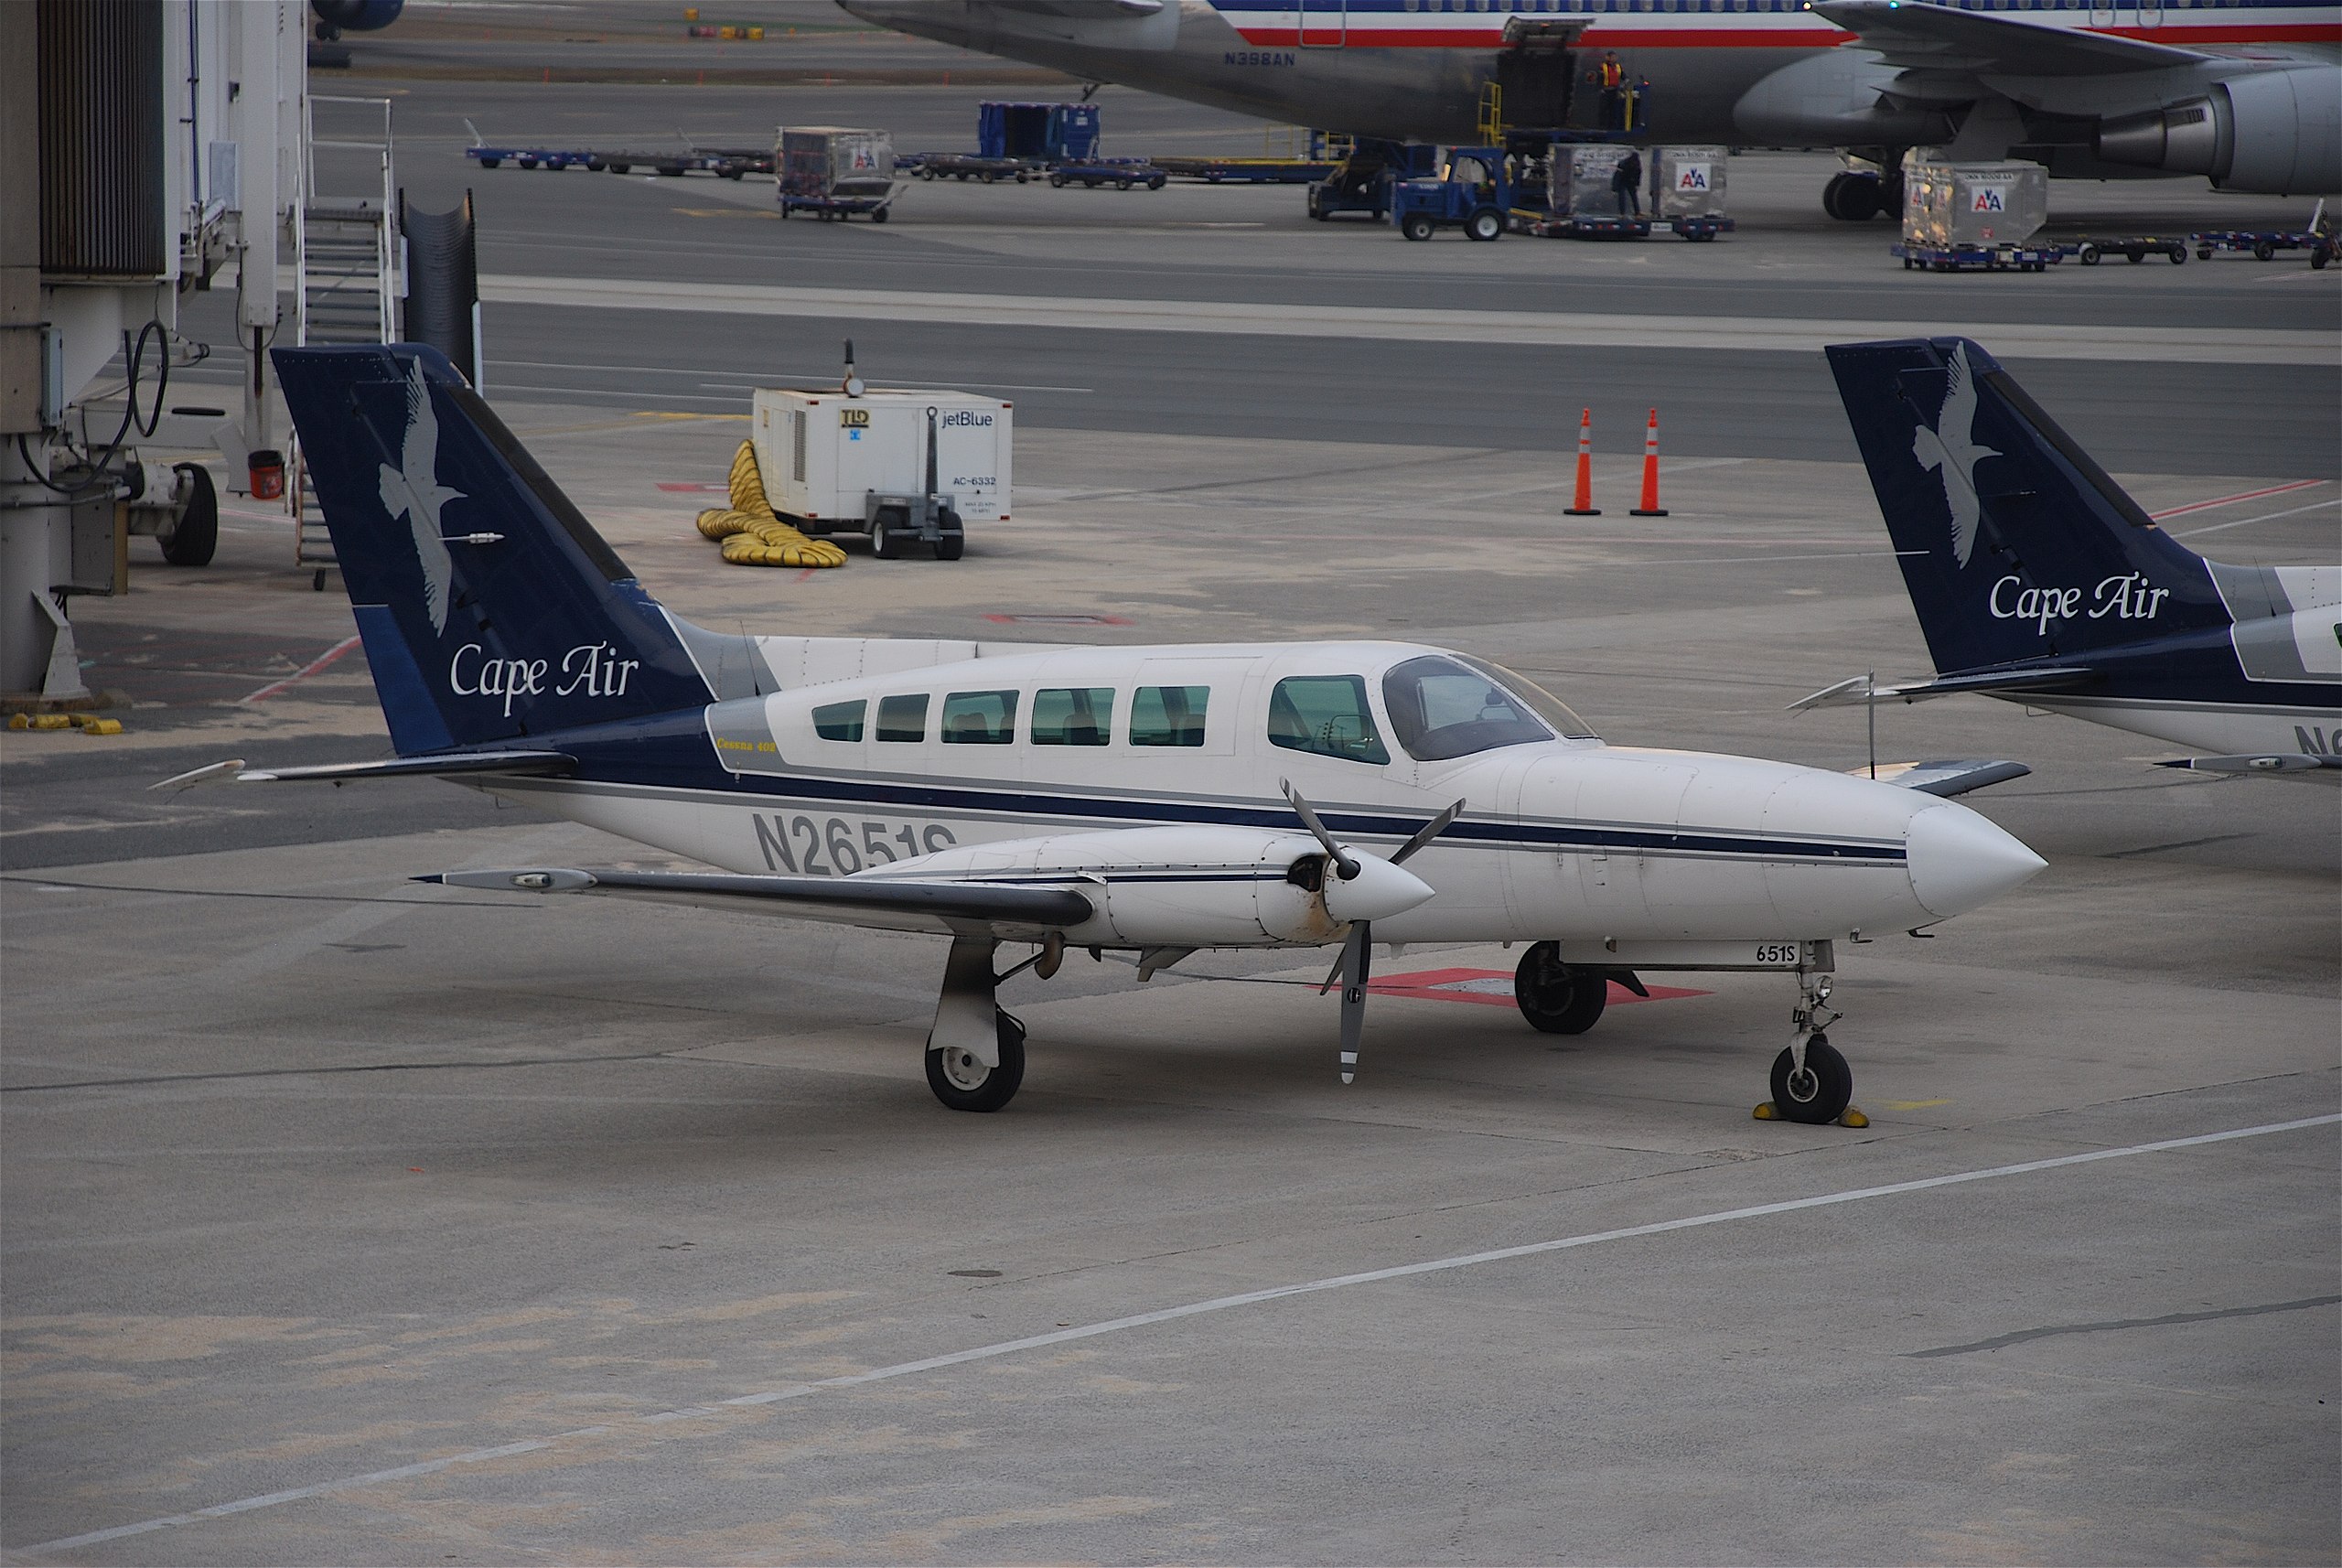 Cape Air Cessna 402C crash lands in Chicago O'Hare Airport.